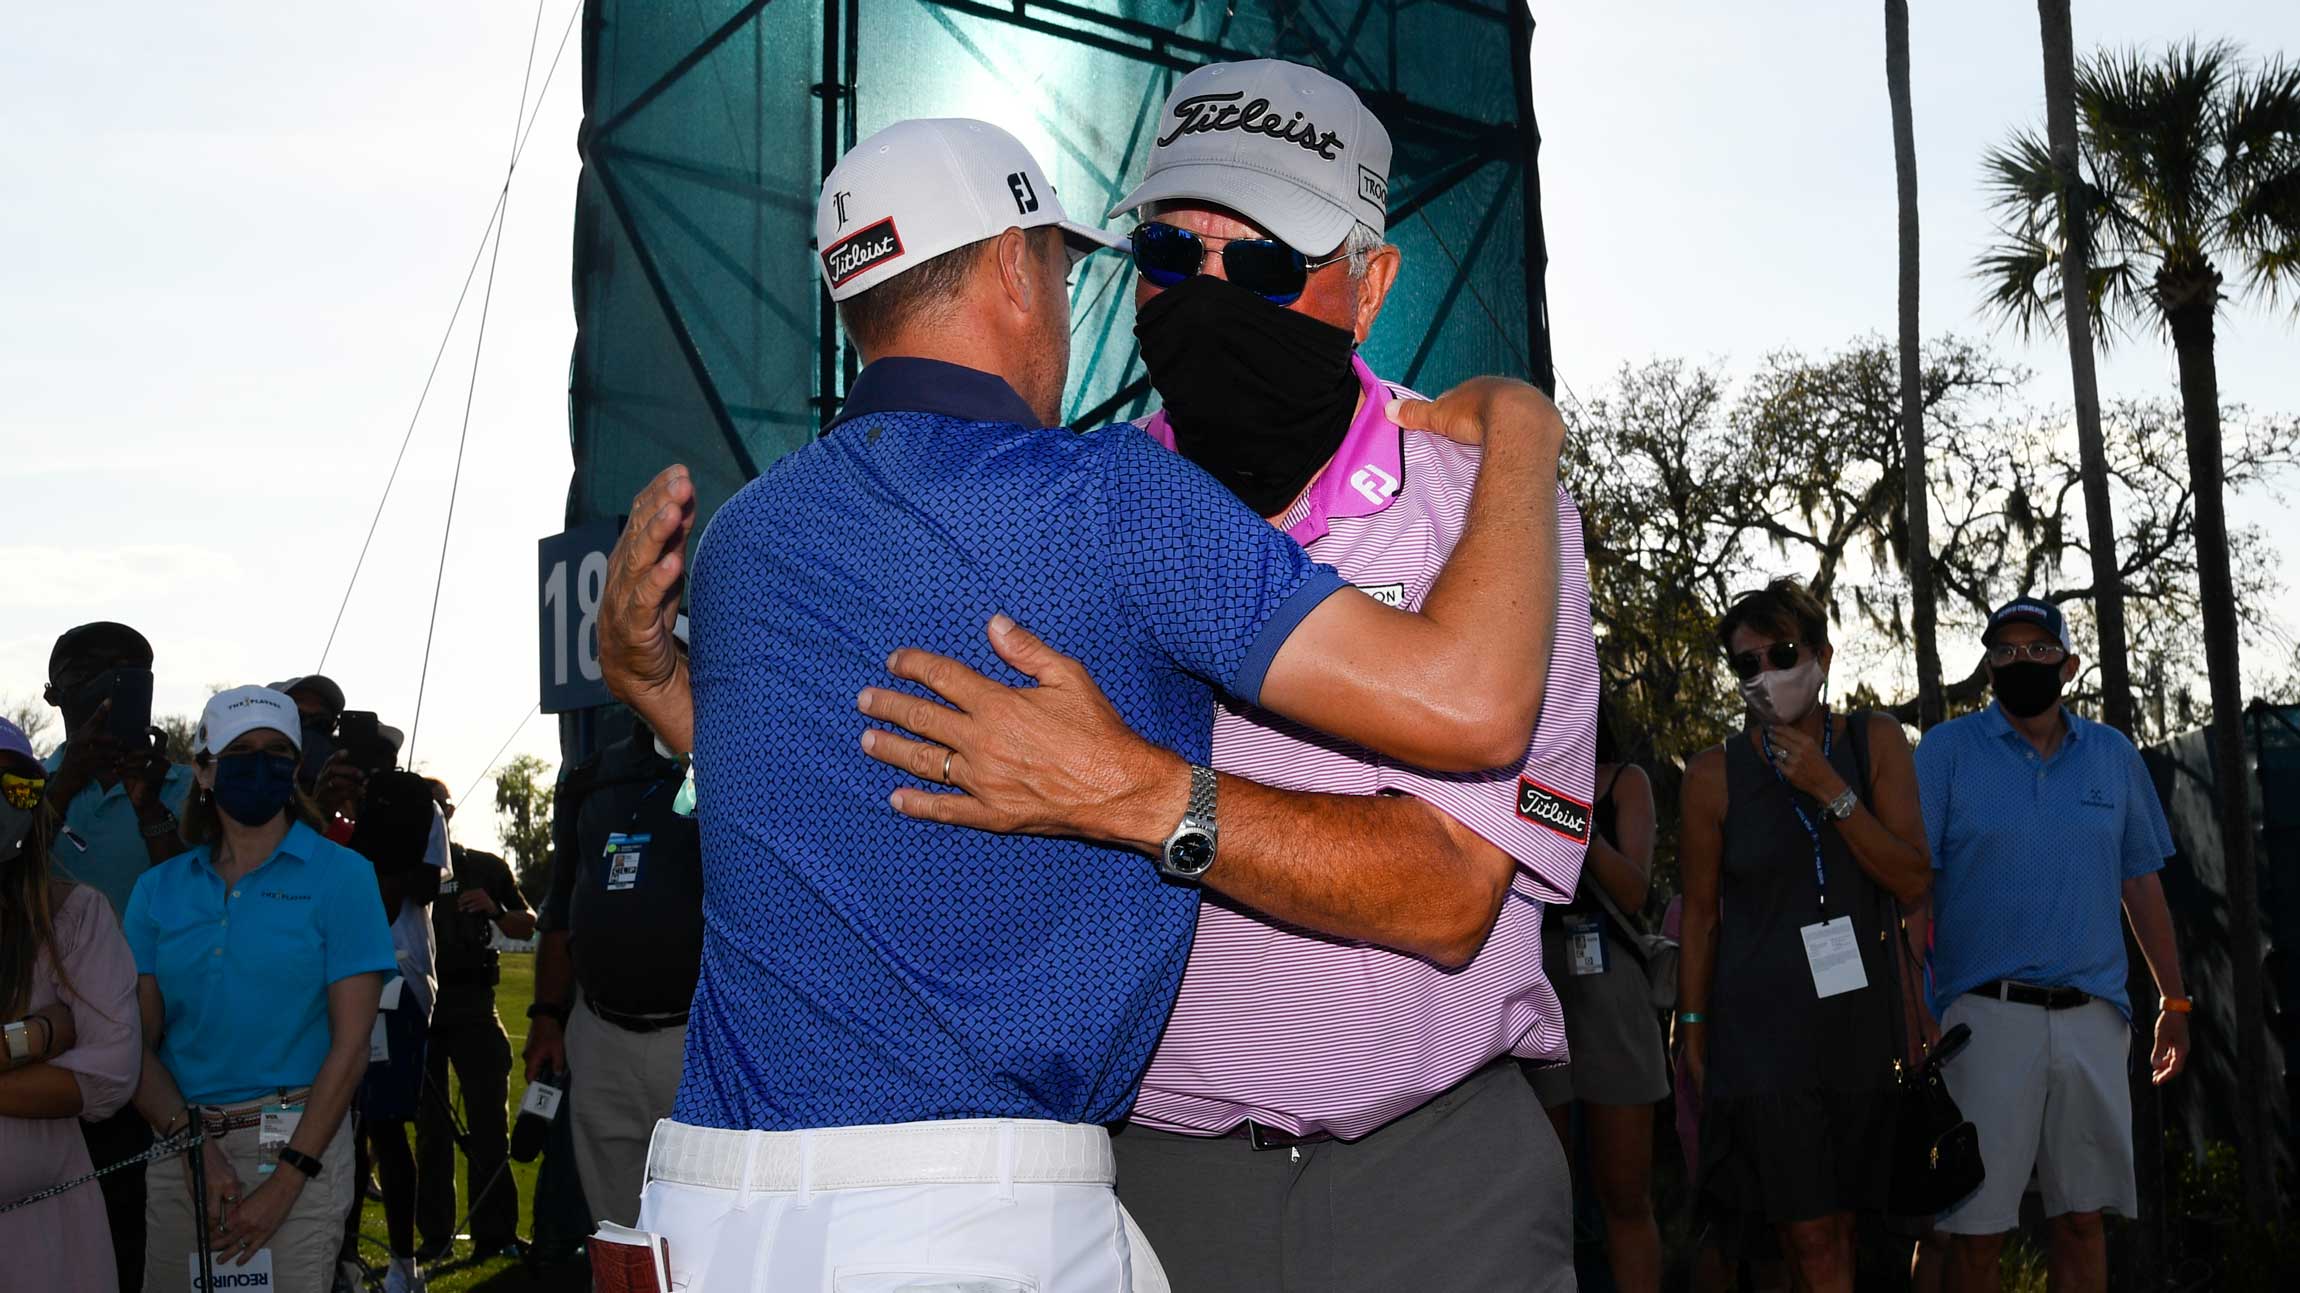 Justin Thomas wins Players Championship in wake of offcourse turmoil